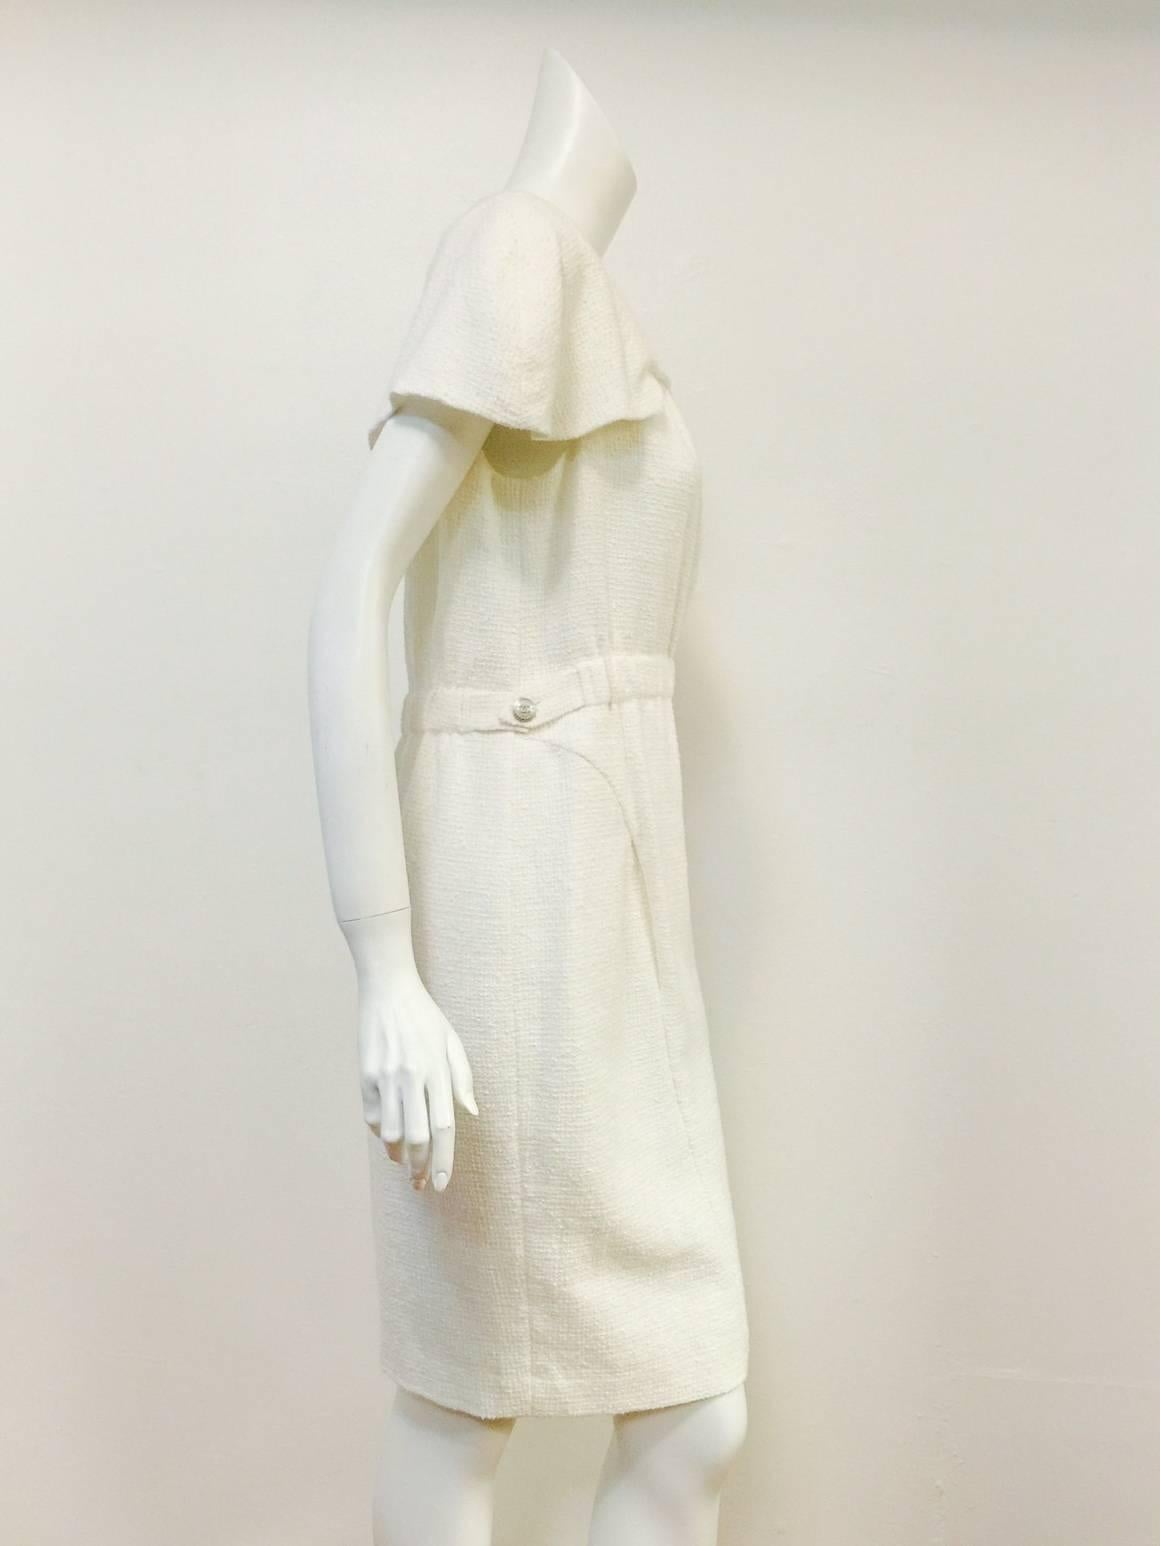 Chanel Ivory Cotton Dress pays homage to the design aesthetic of Coco herself!  Comfortable?  Chic?  But of course!   Dress features signature cotton tweed fabric, round neckline, banded waist and slightly above the knee length.   Dolman capped